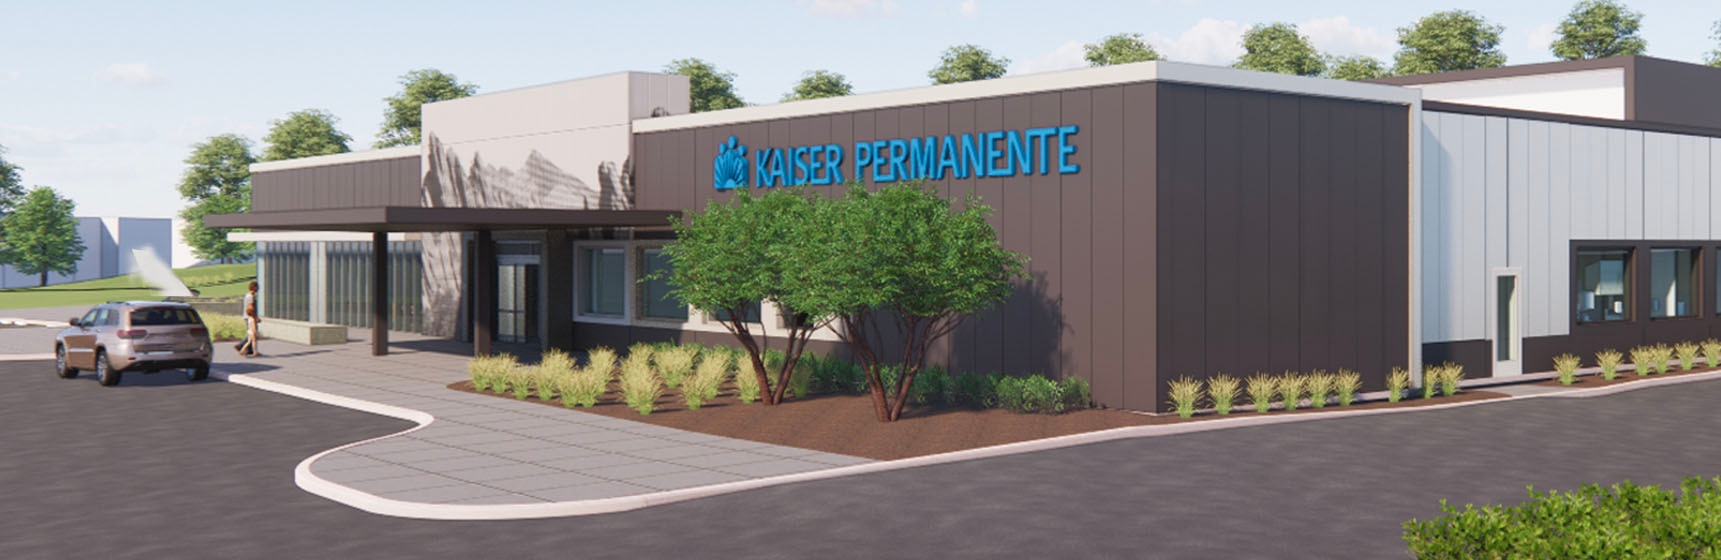 Image of a Kaiser Permanente medical office